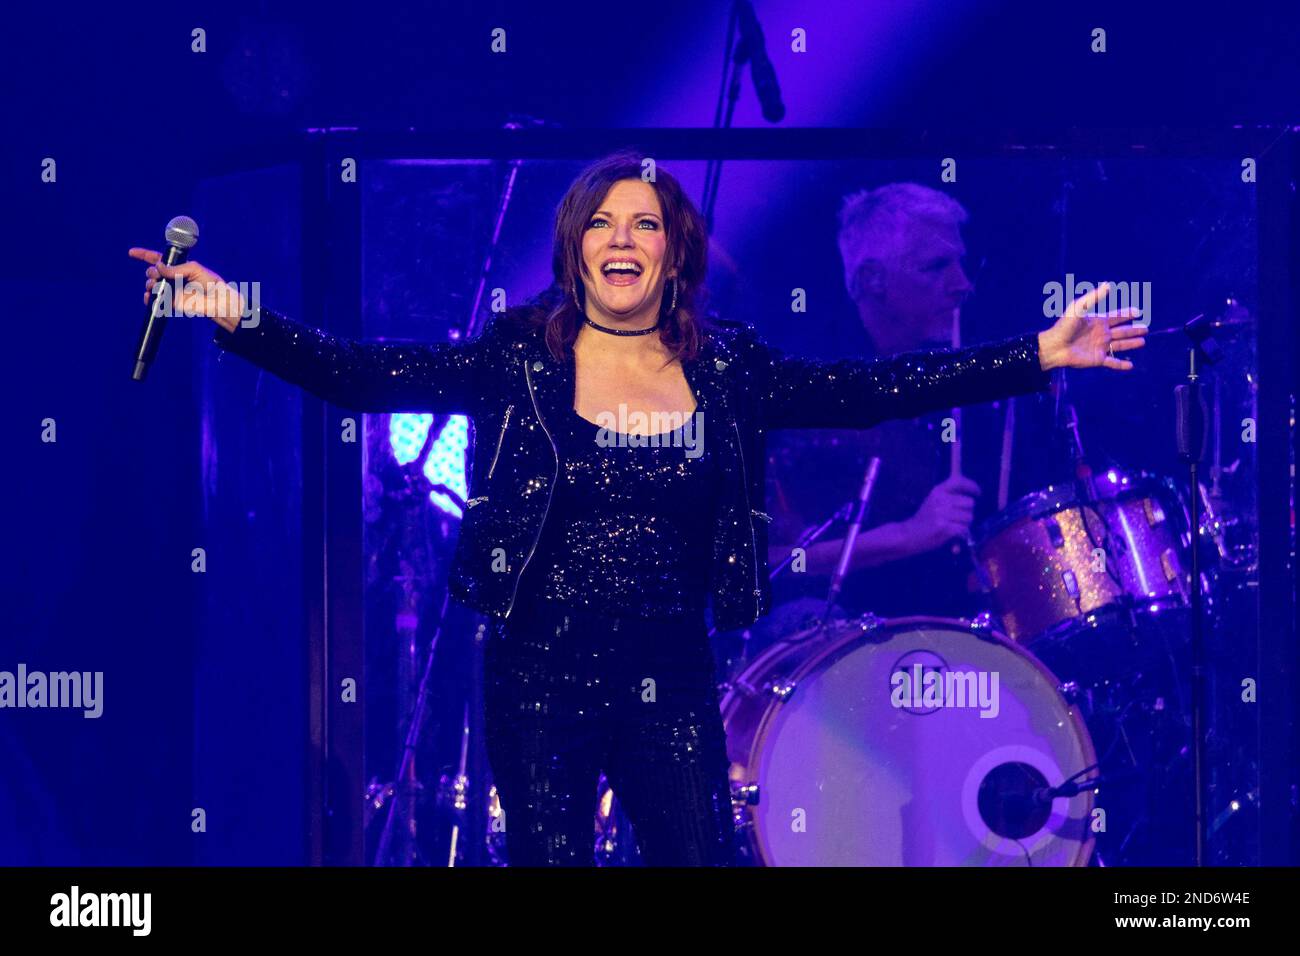 Martina McBride performs during The Judds The Final Tour at Vibrant